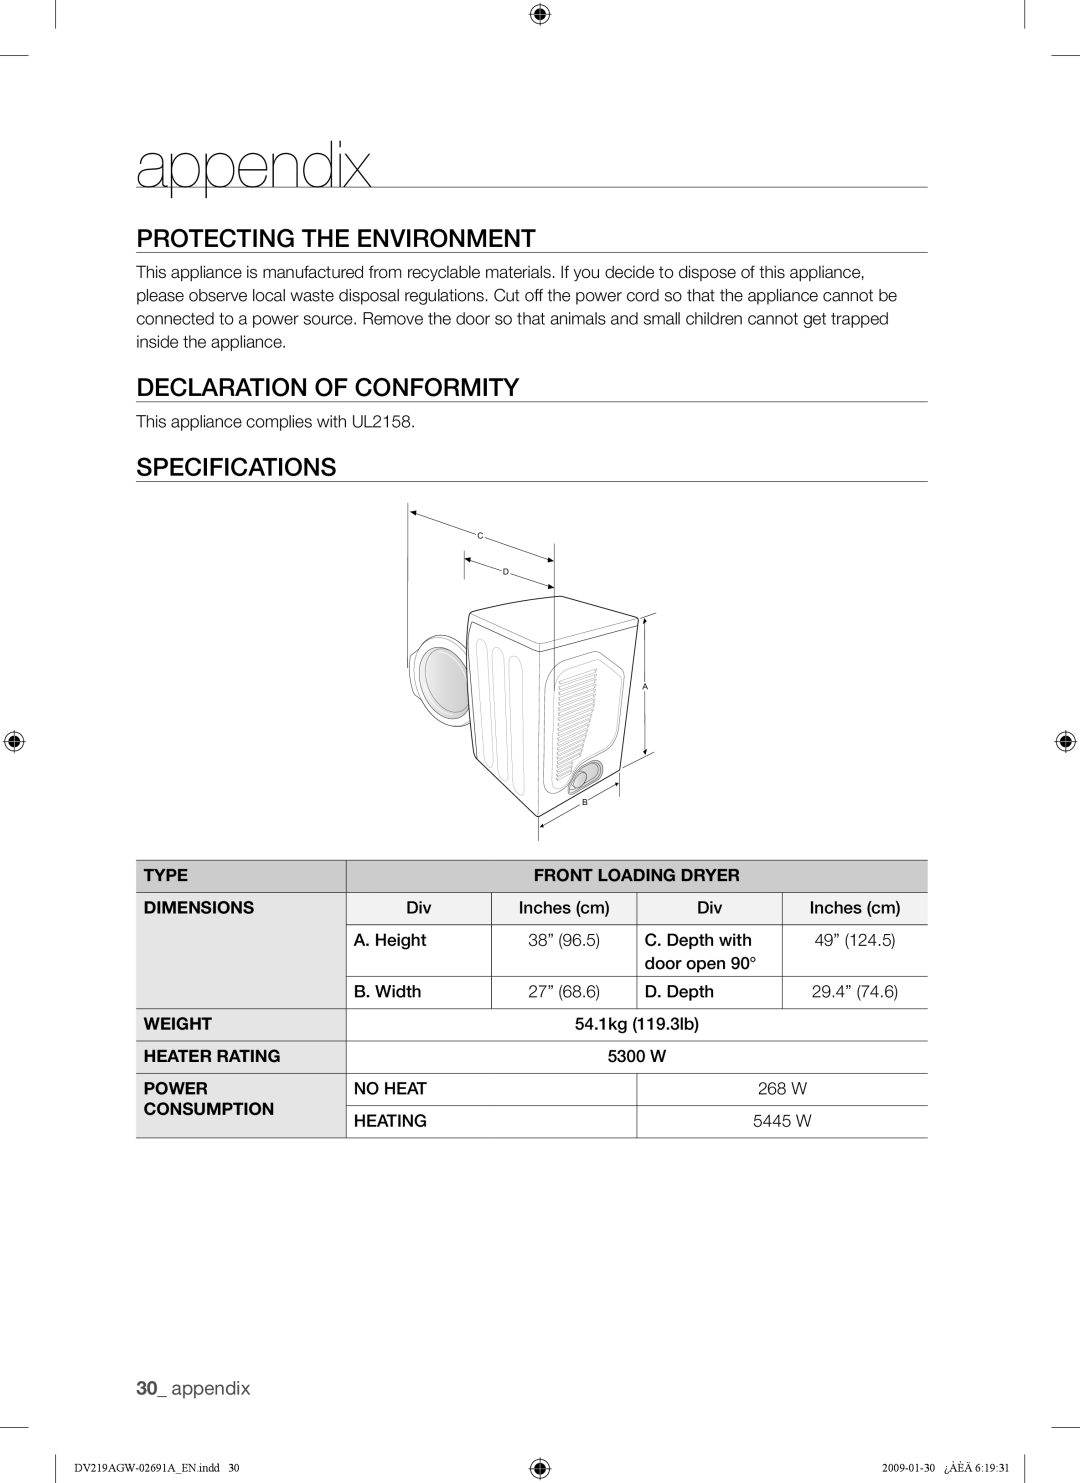 Samsung DV219AE* Protecting The Environment, Declaration Of Conformity, Specifications, appendix, Type, Dimensions, Weight 